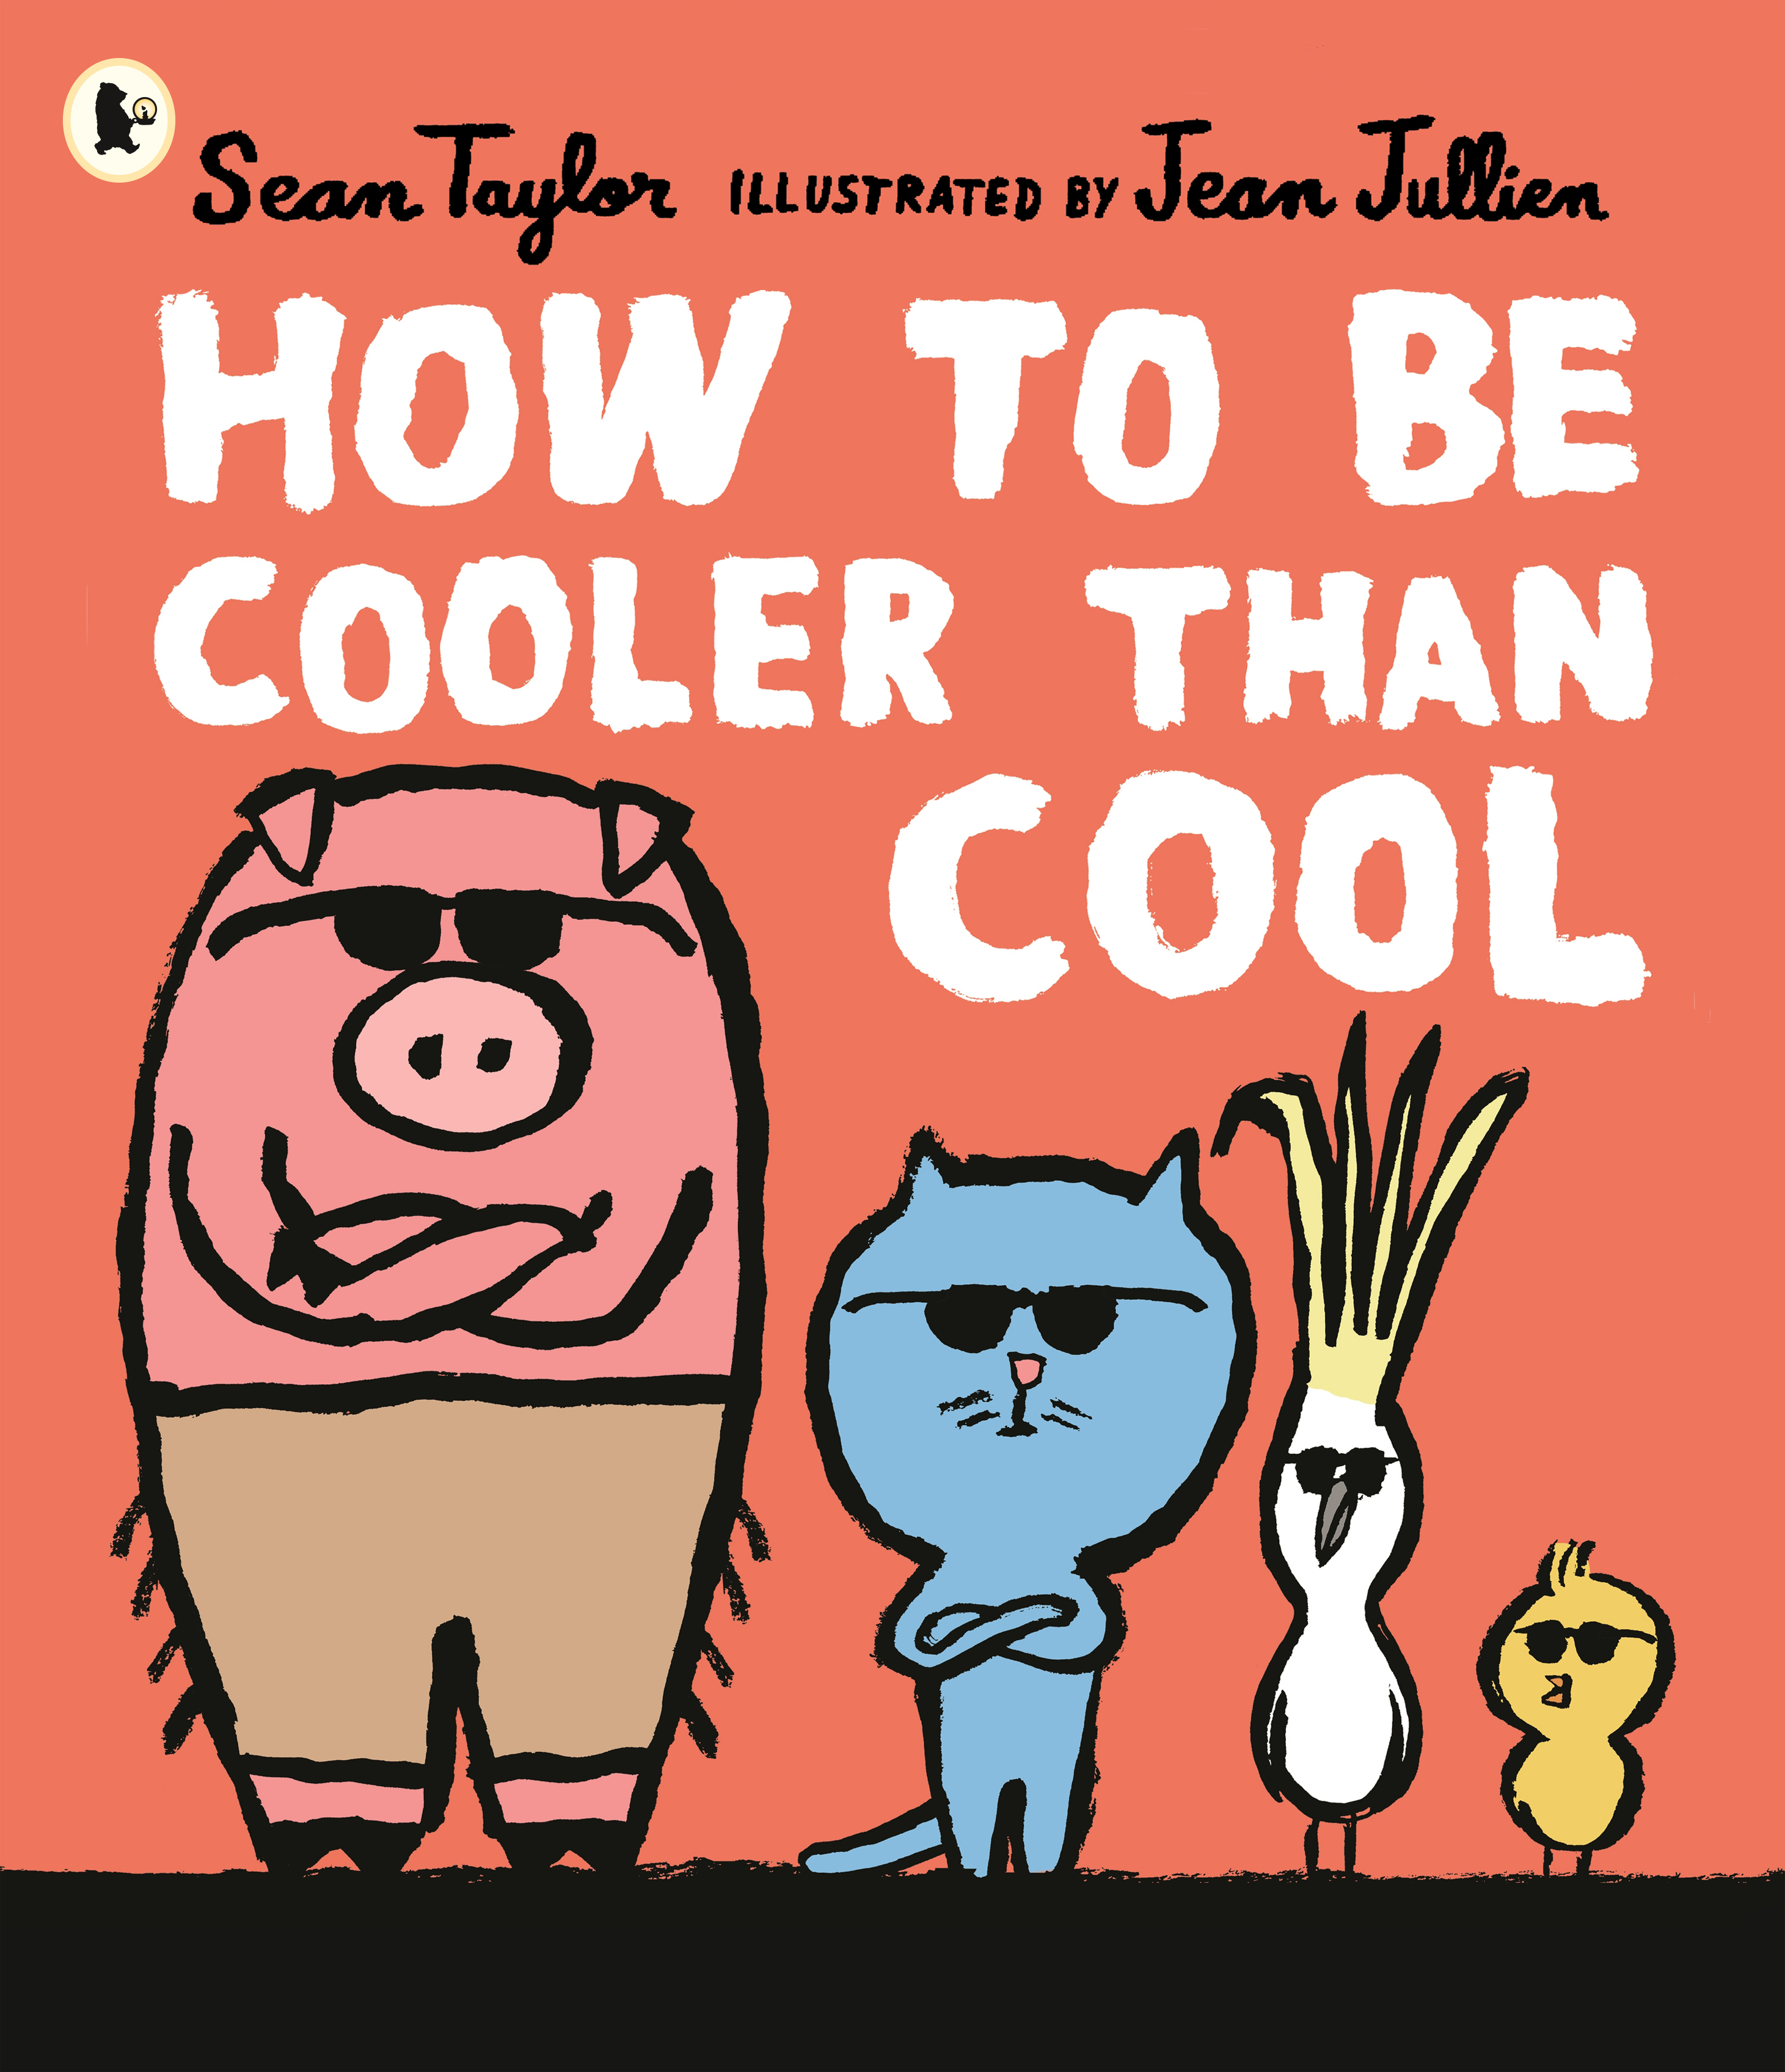 How-to-Be-Cooler-than-Cool